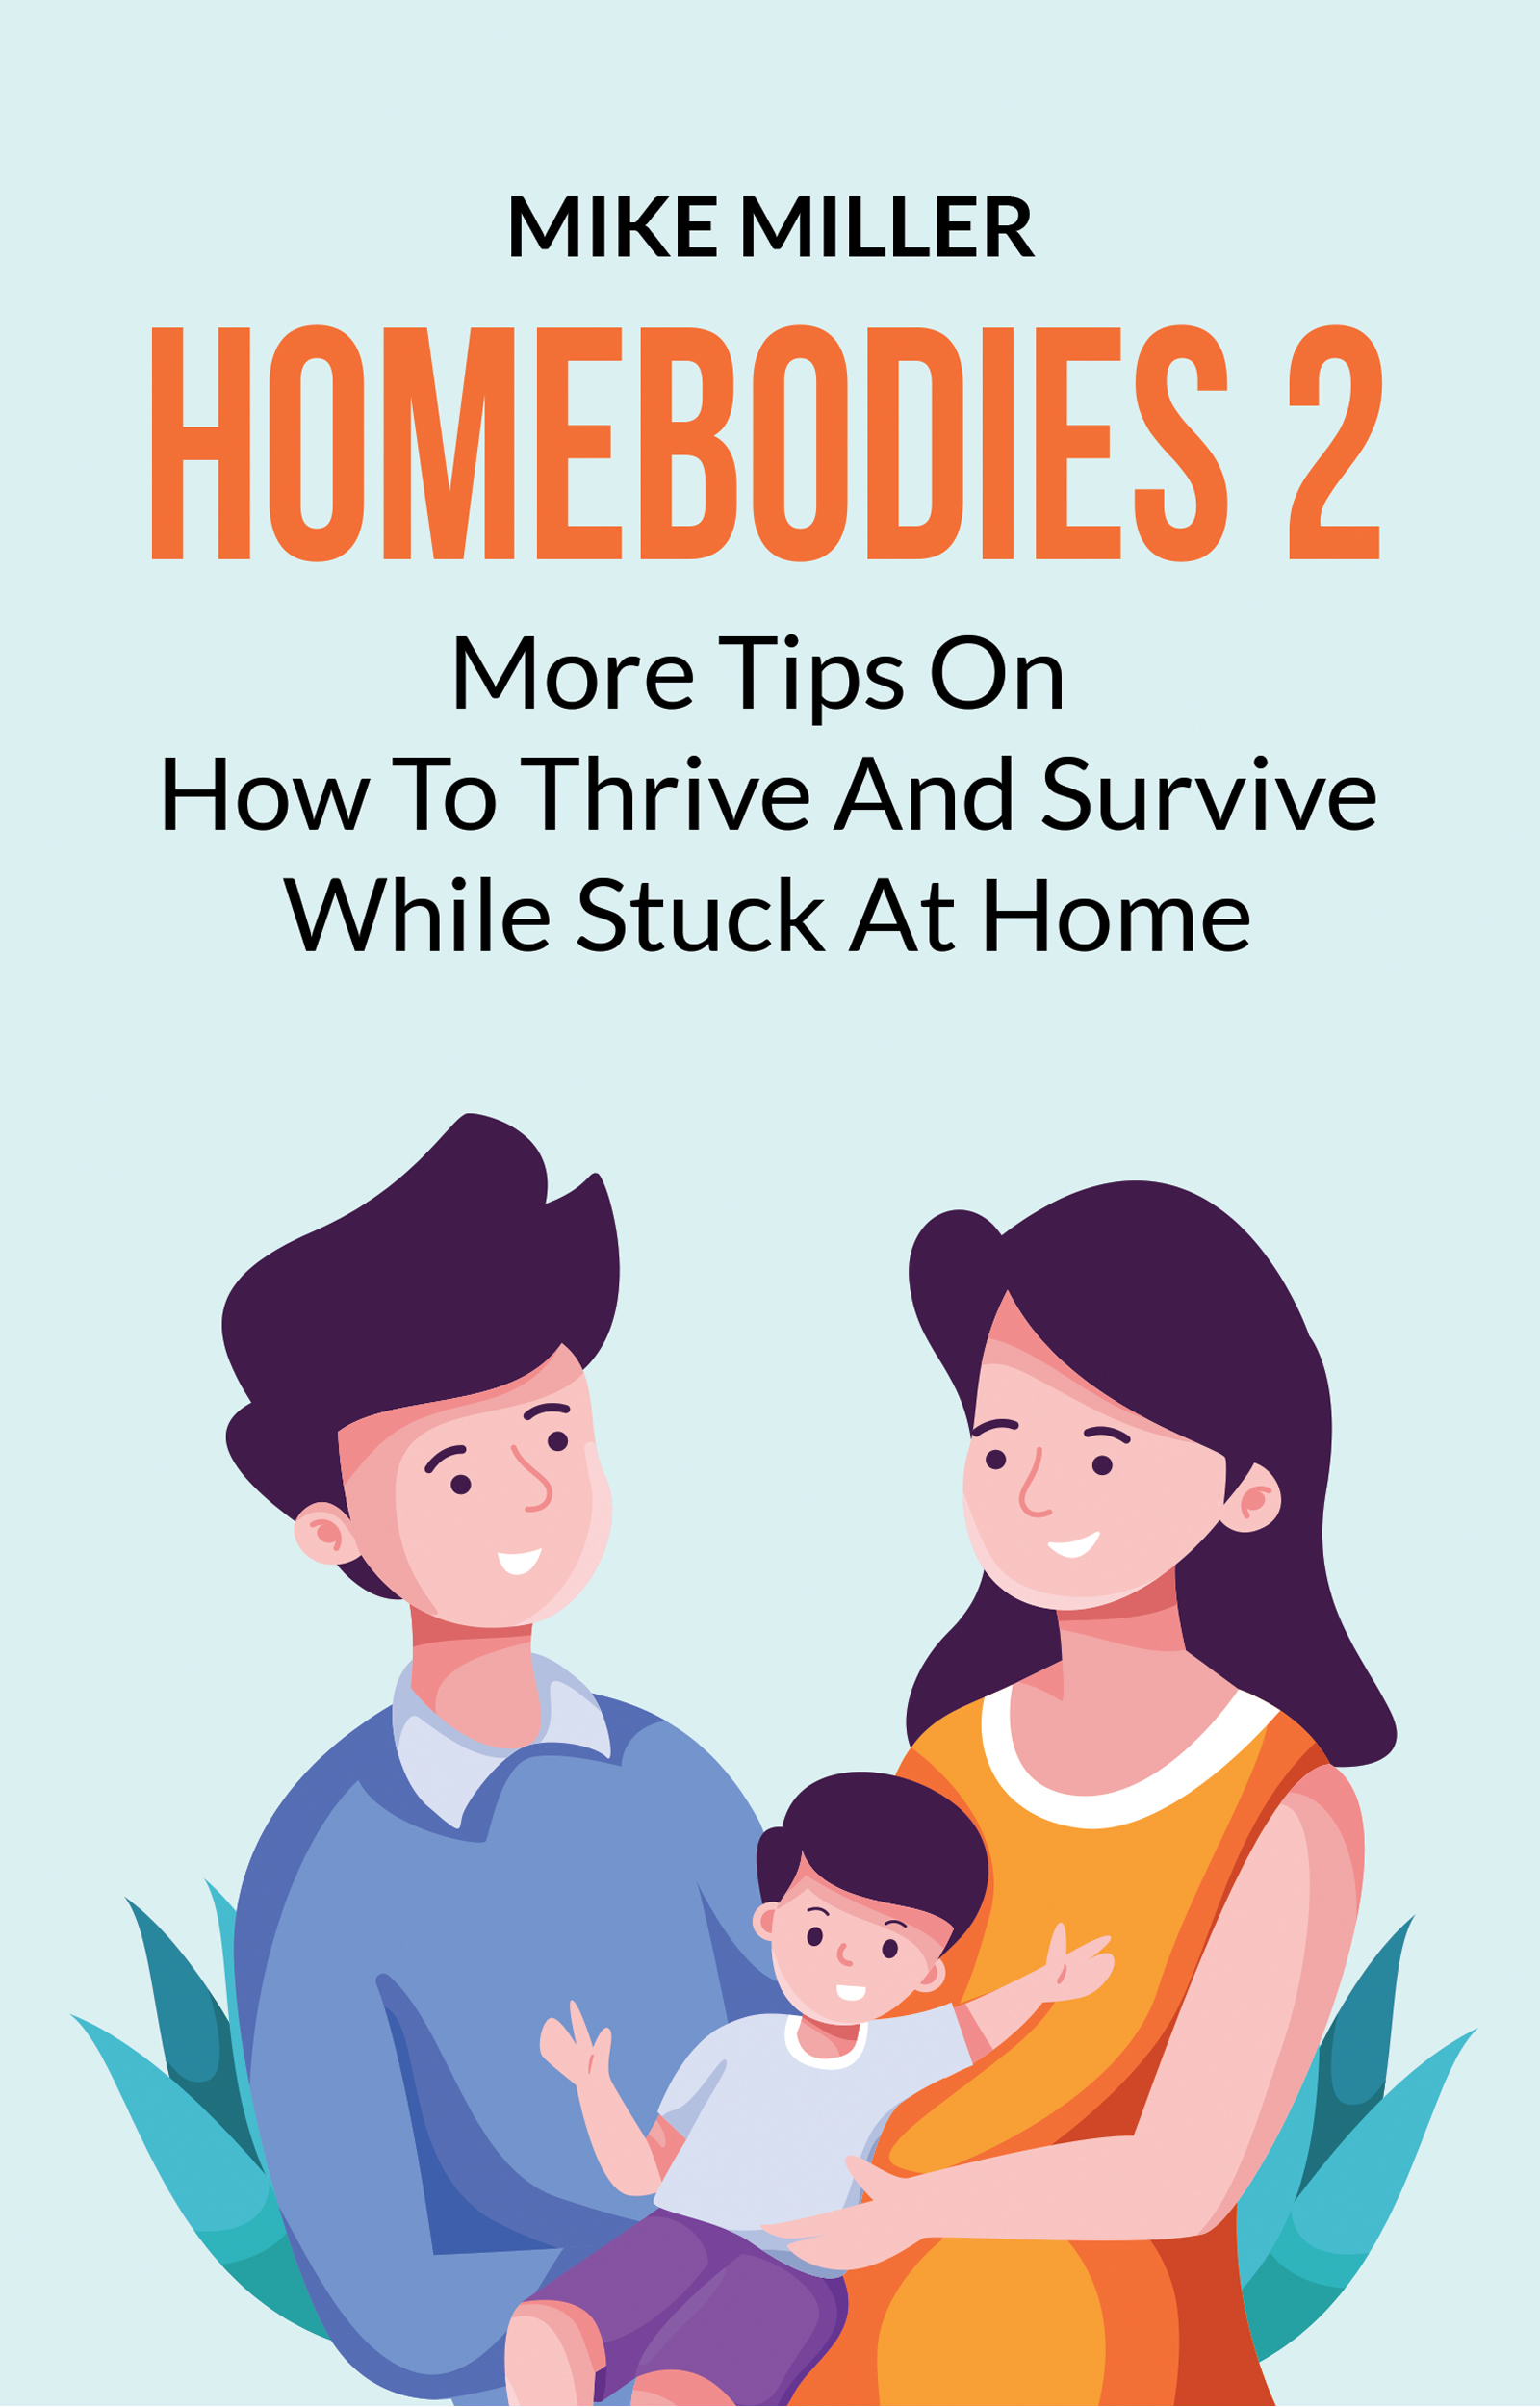 FREE: Homebodies 2 by Mike Miller